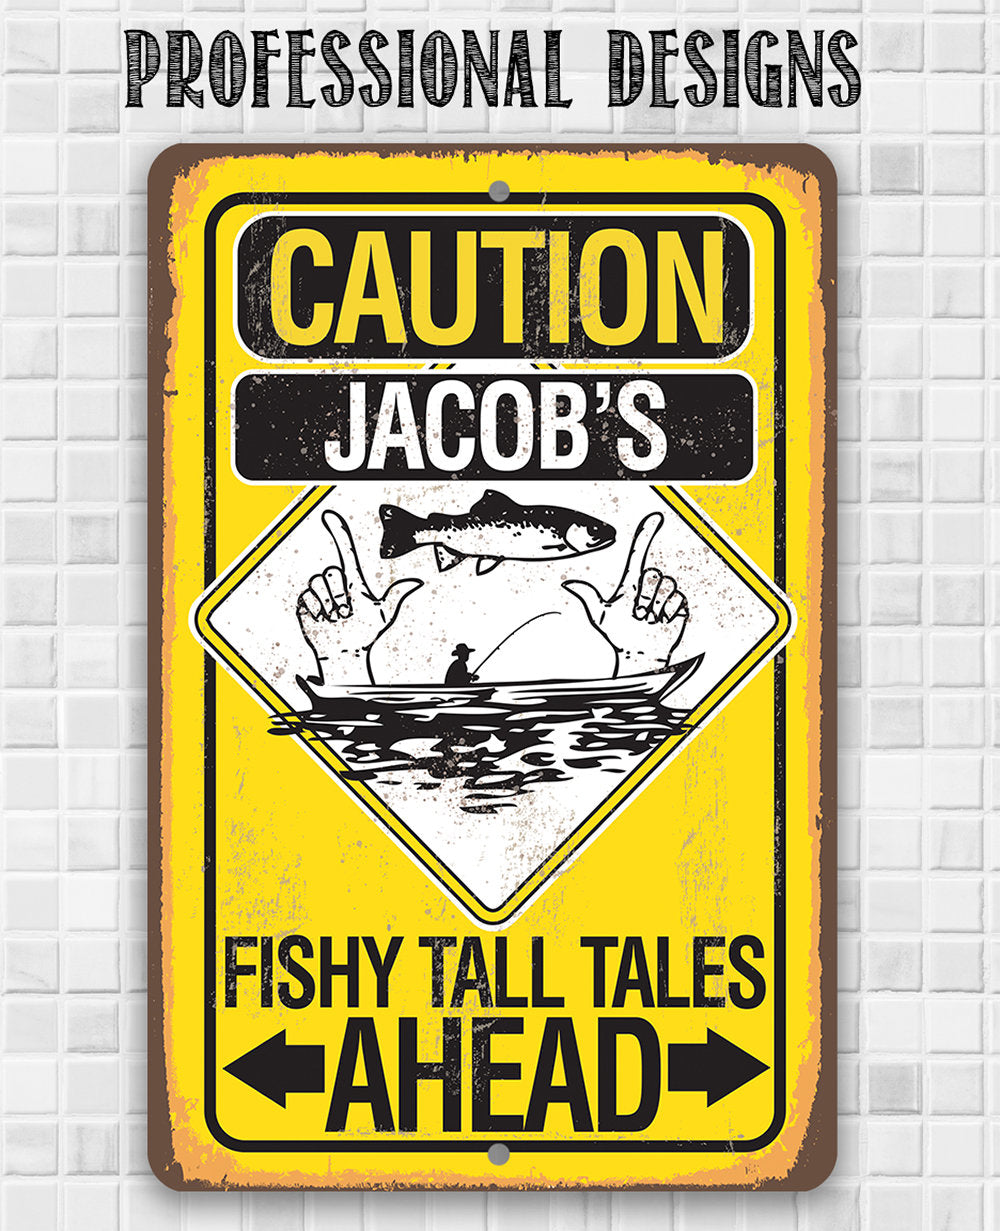 Personalized - Caution Fishy Tall Tales Ahead - Metal Sign Metal Sign Lone Star Art 